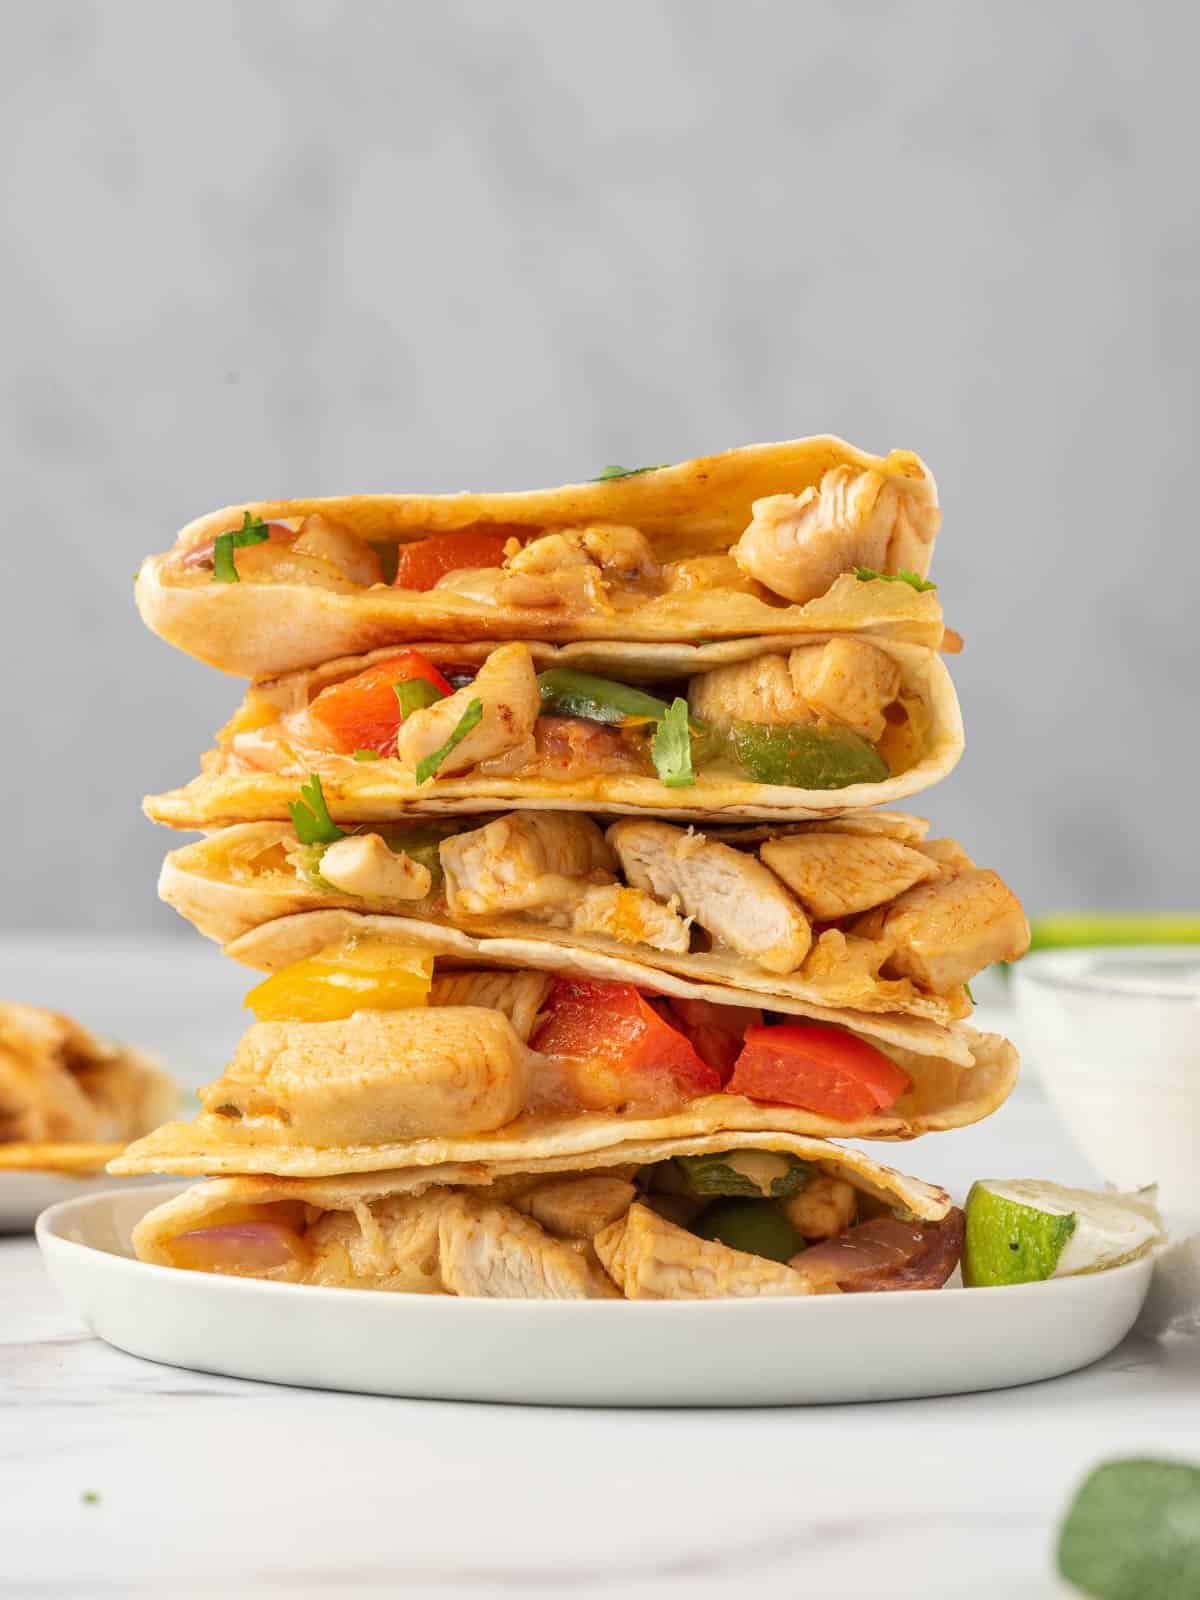 A stack of chicken and cheese quesadillas on a plate.